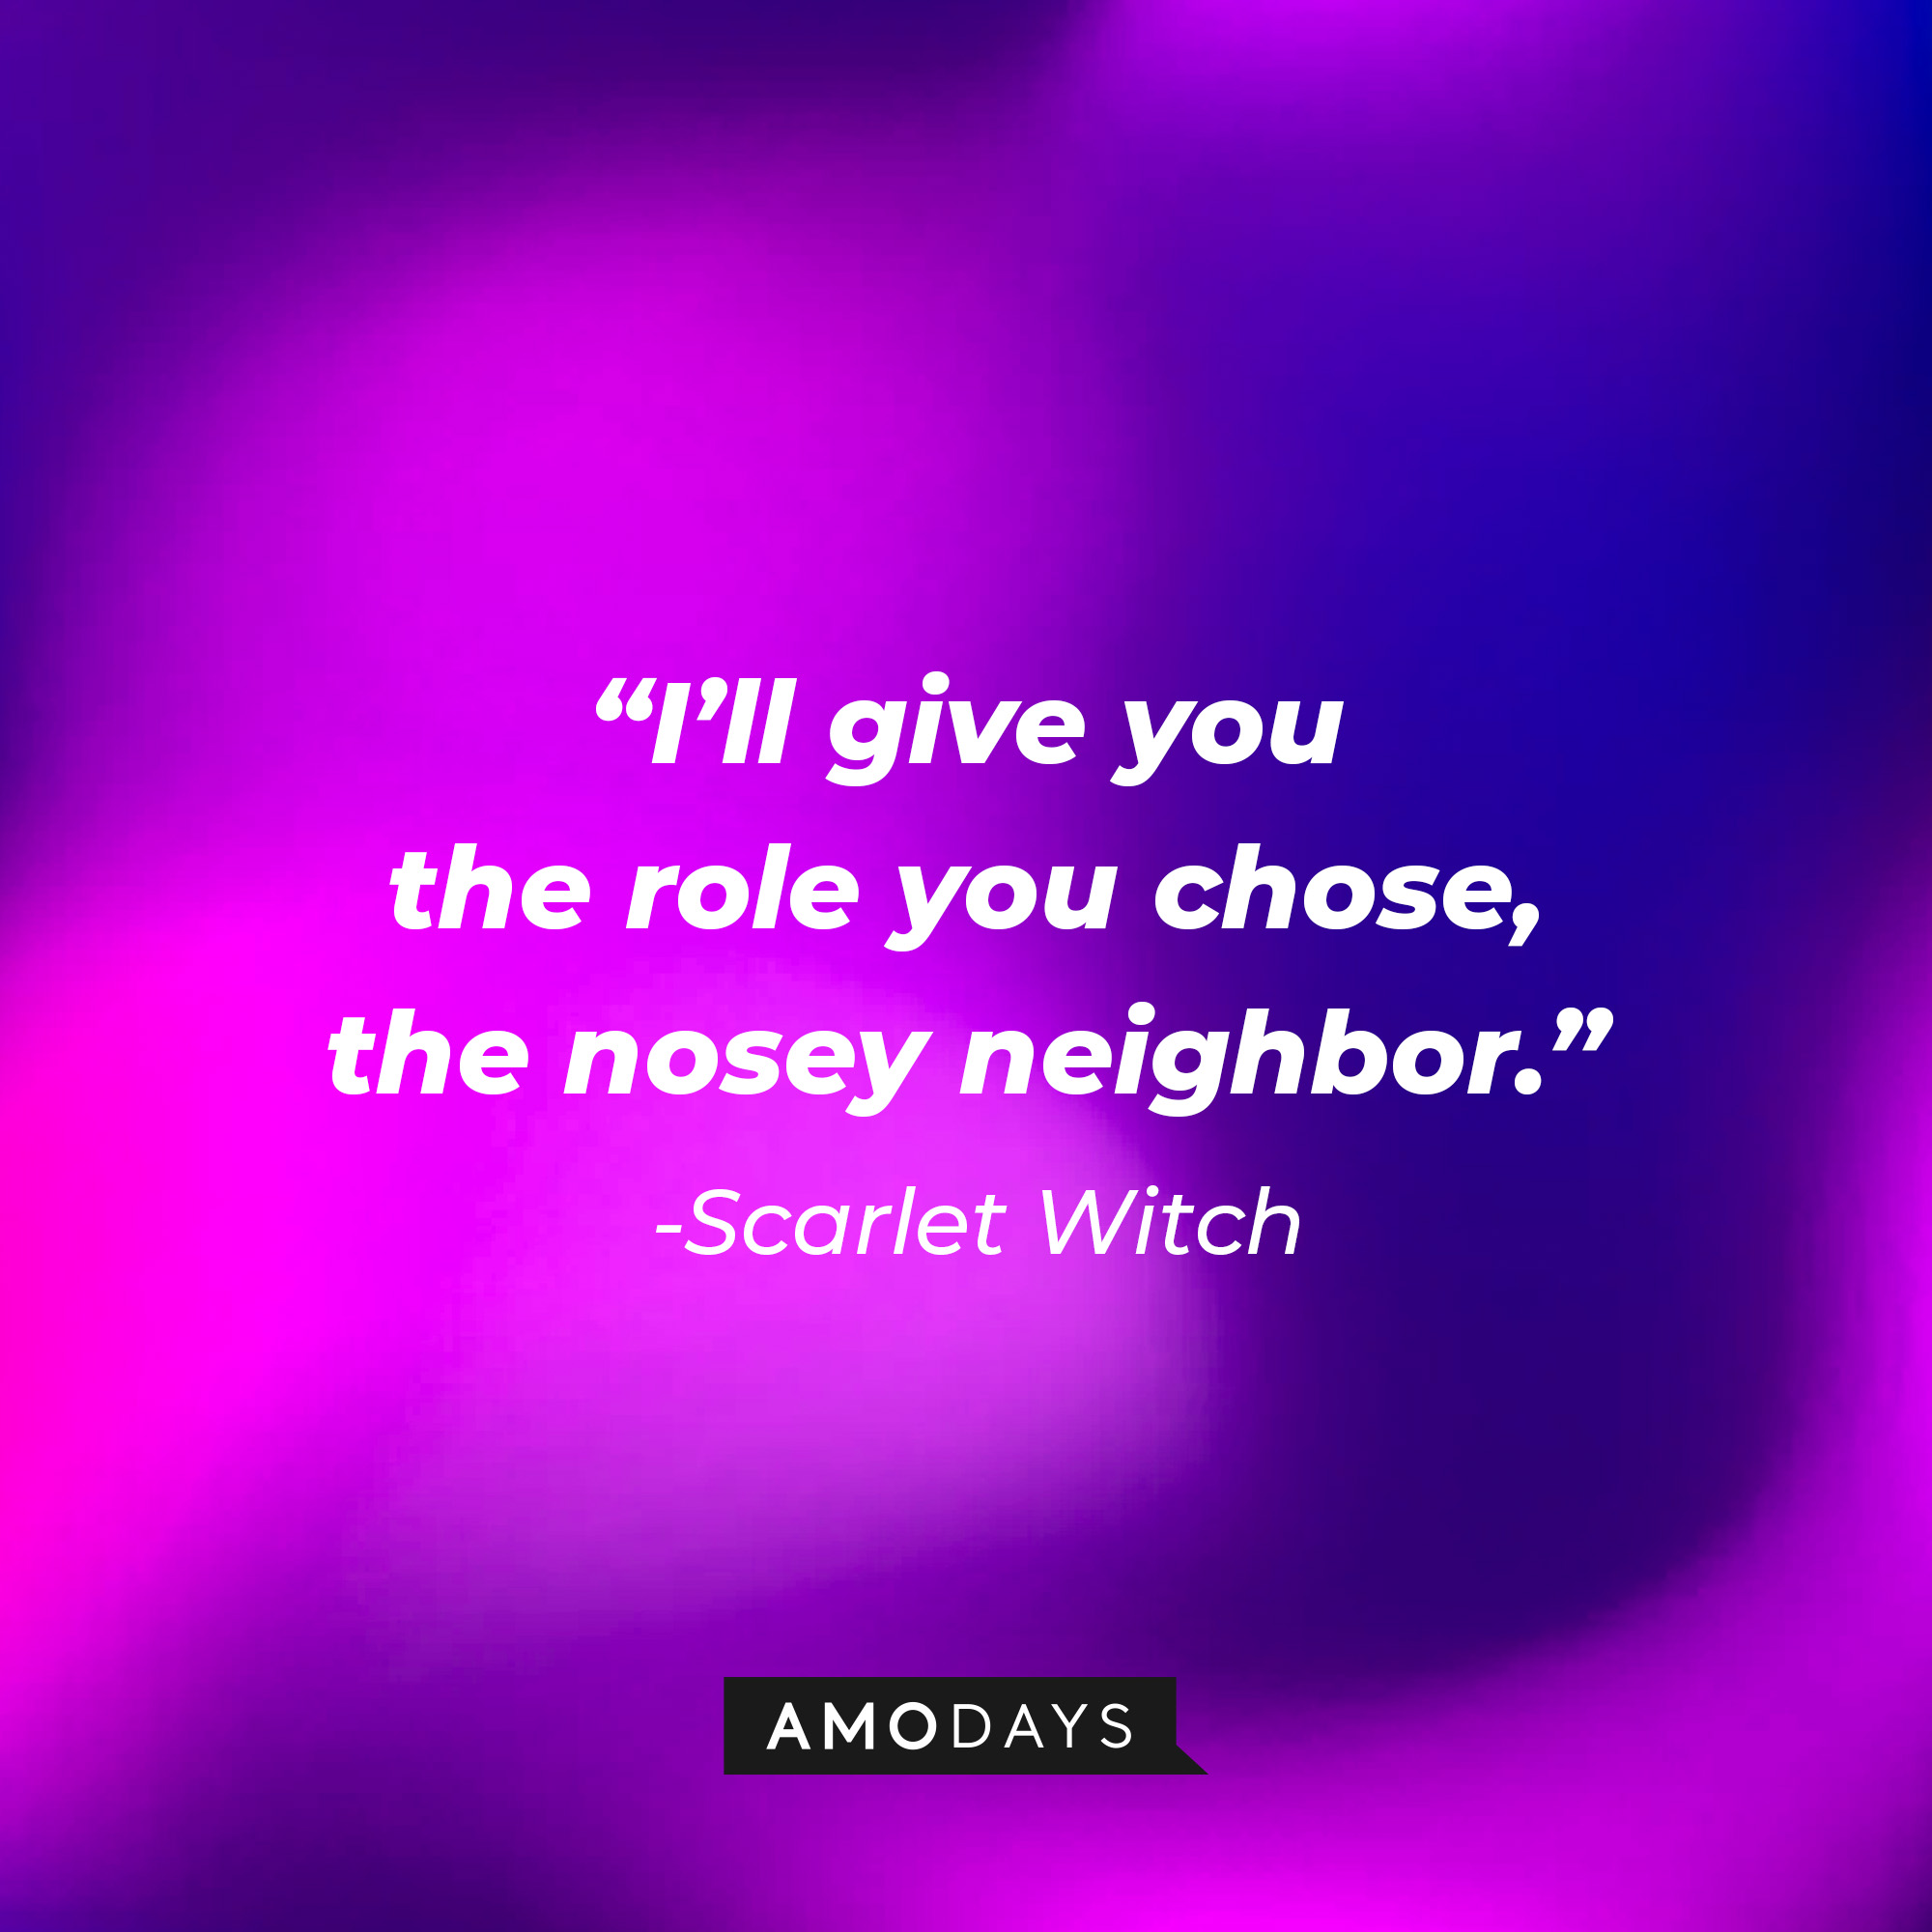 Scarlet Witch’s quote: “I’ll give you the role you chose, the nosey neighbor.” | Source: AmoDays